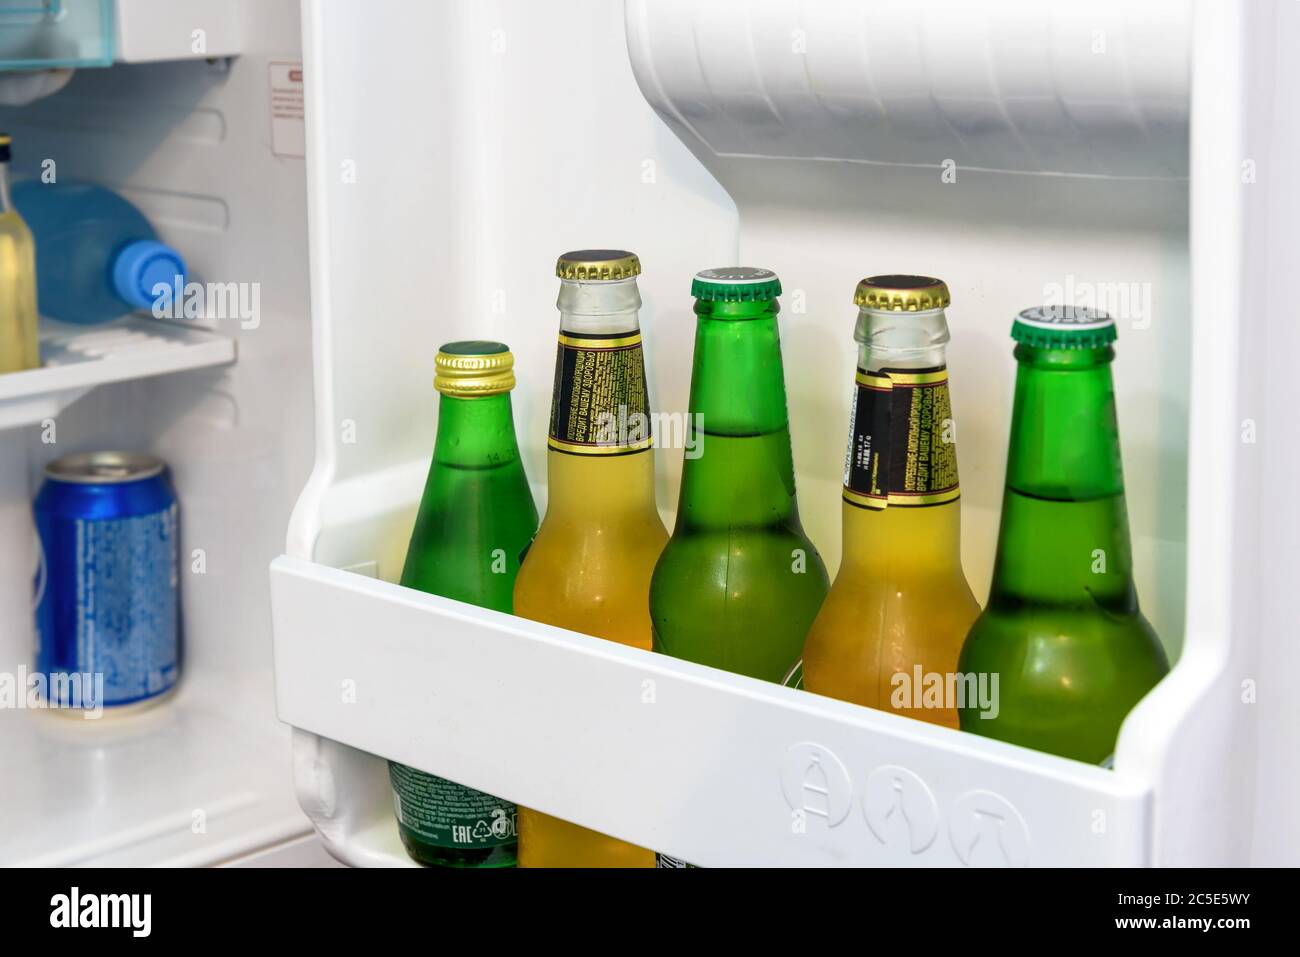 Mini fridge full of bottles of beer and water in a hotel room Stock Photo